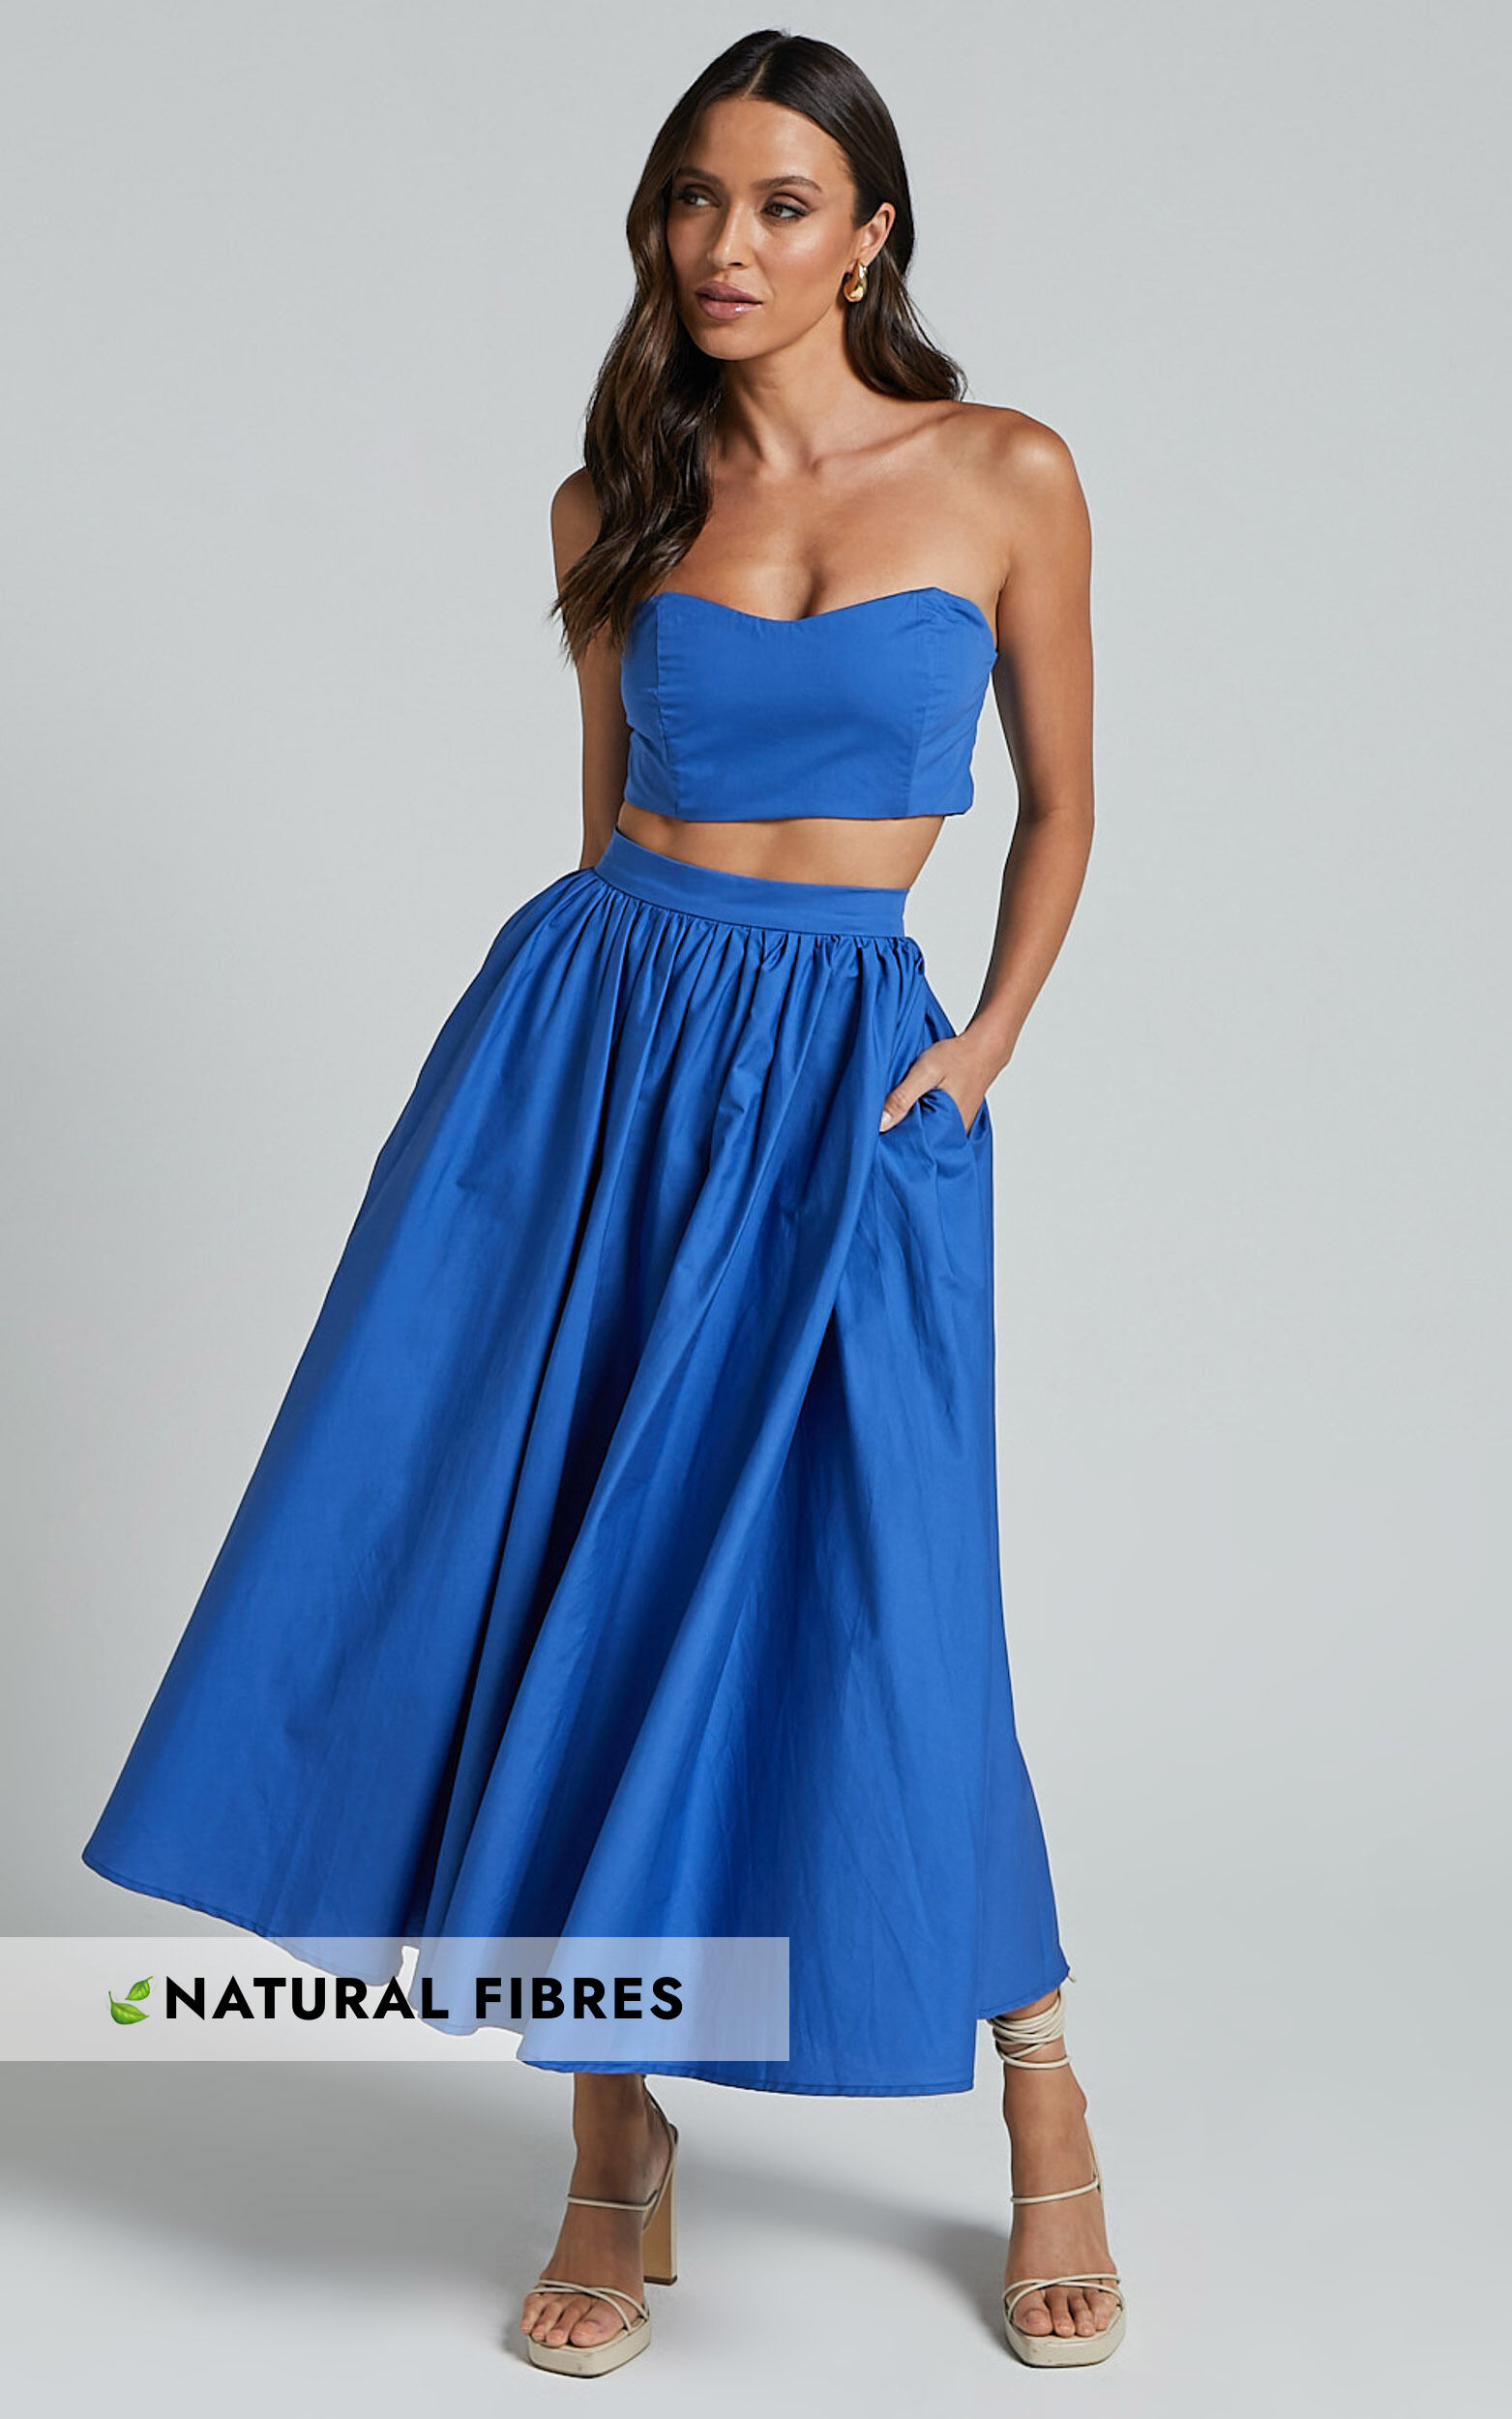 Olympia Two Piece Set - Strapless Corset Top and Full Midi Skirt Set in Cobalt Blue - 06, BLU1